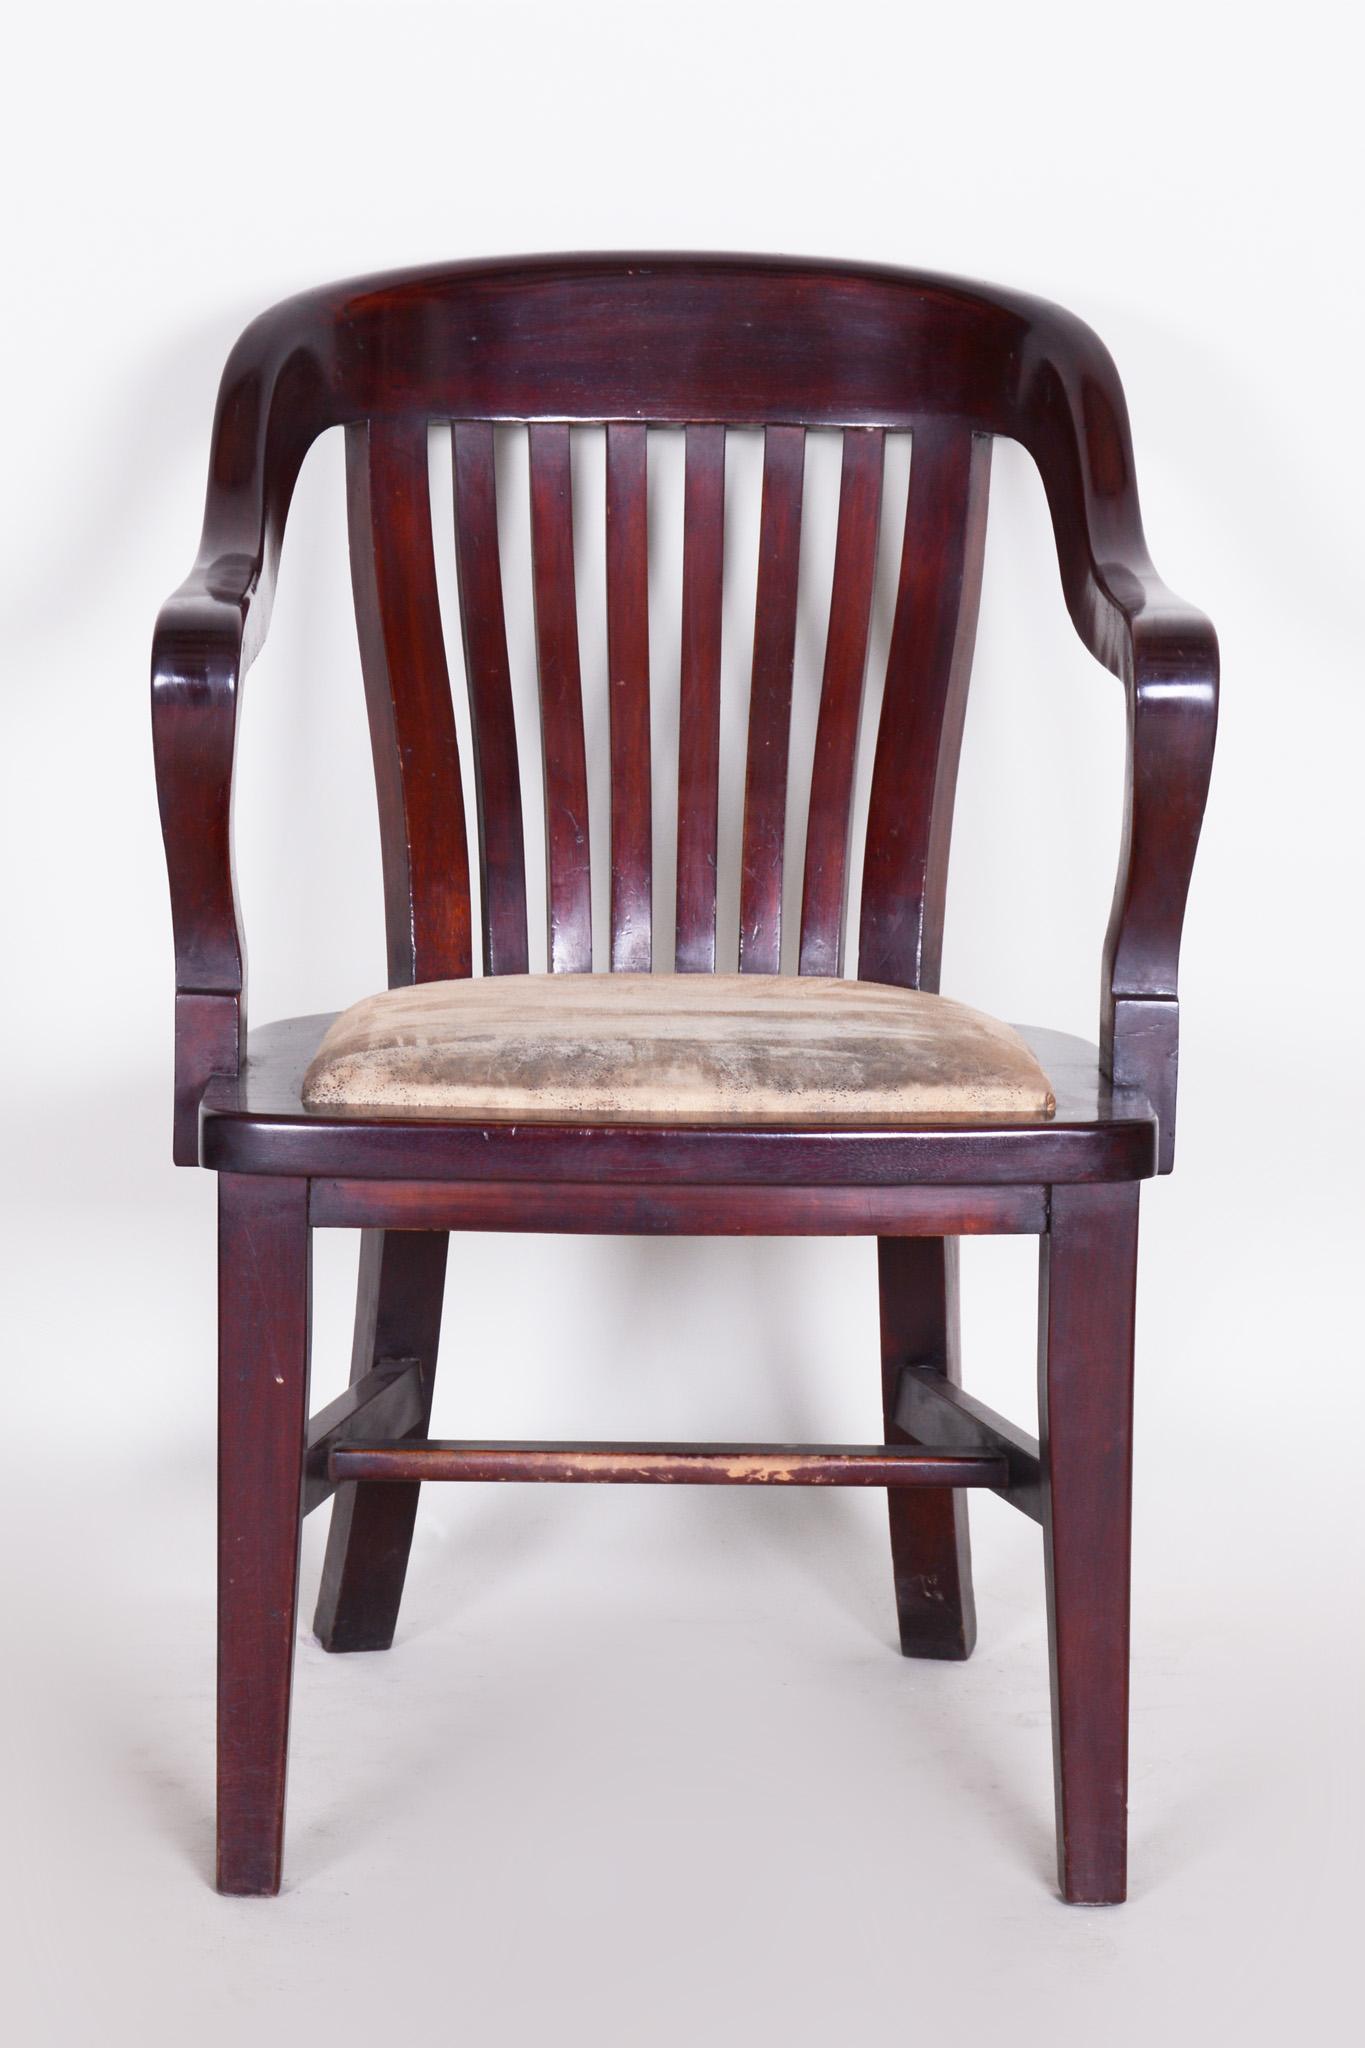 Newly upholstered Biedermeier armchair
Material: Mahogany.
Source: Germany
Period: 1840-1849.